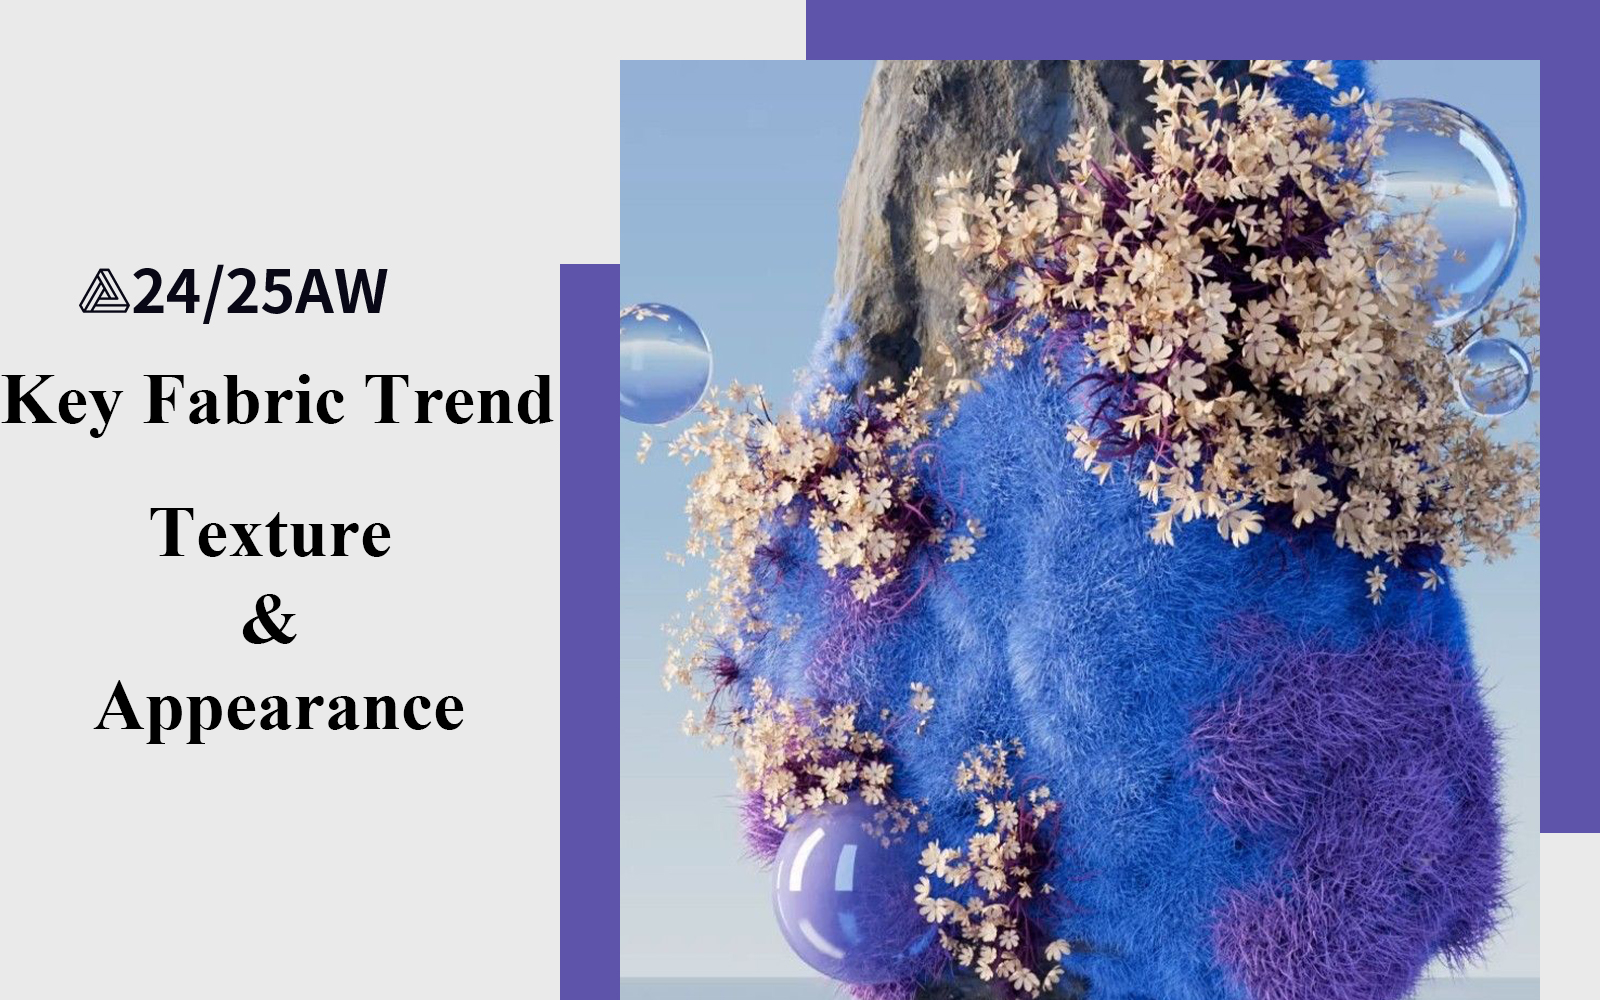 24/25 Autumn/Winter Fabric Key Trends - Appearance and Texture